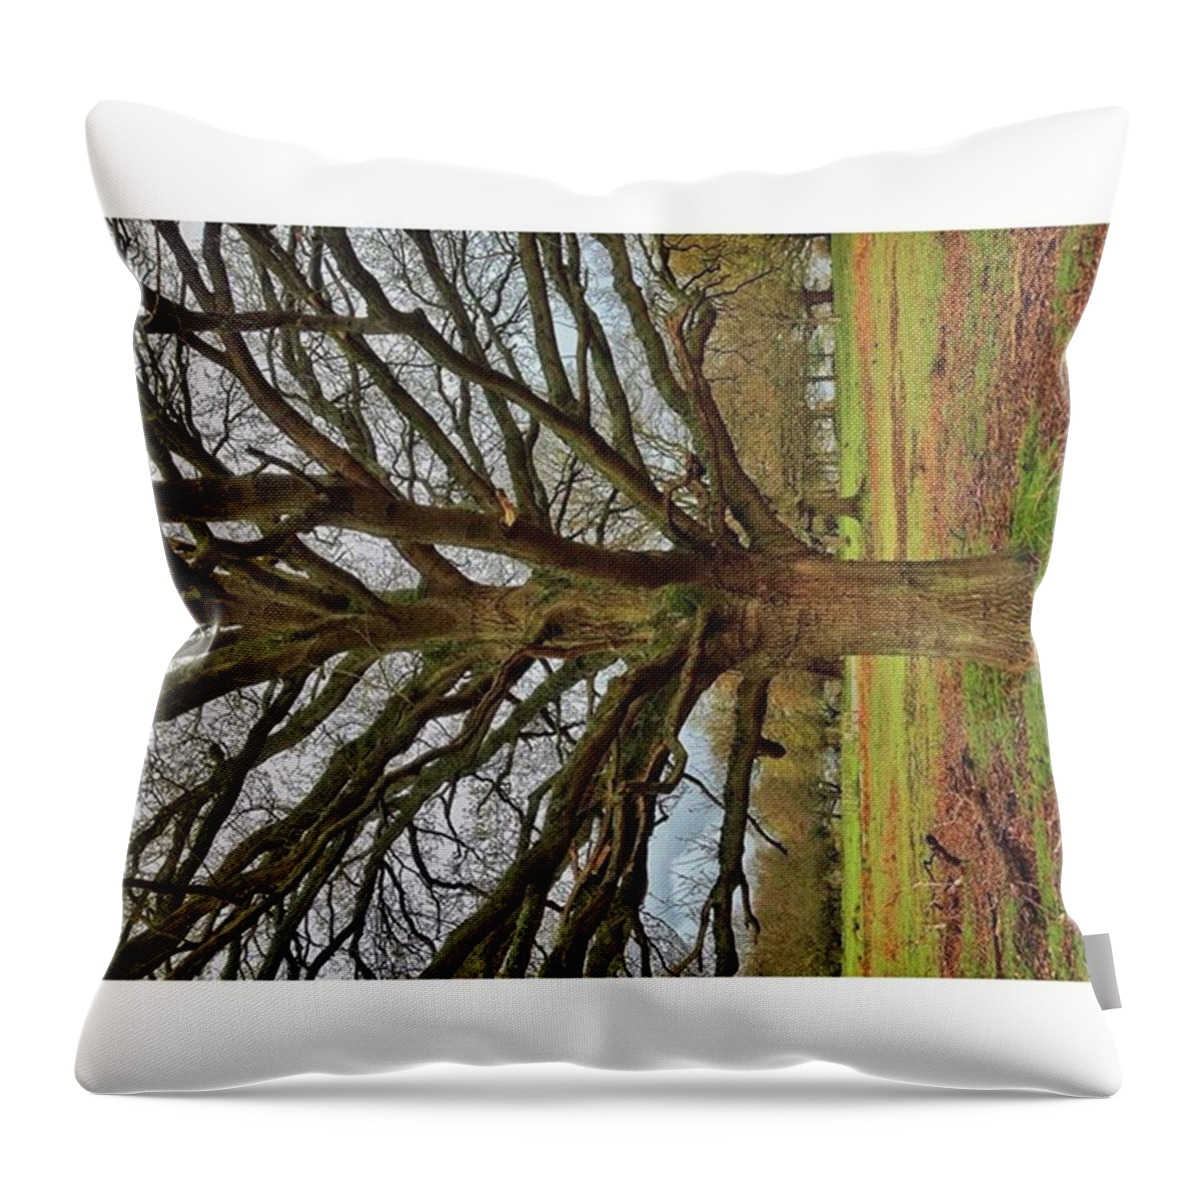 Rootsrundeep Throw Pillow featuring the photograph I Liked Something About This Tree by Tai Lacroix